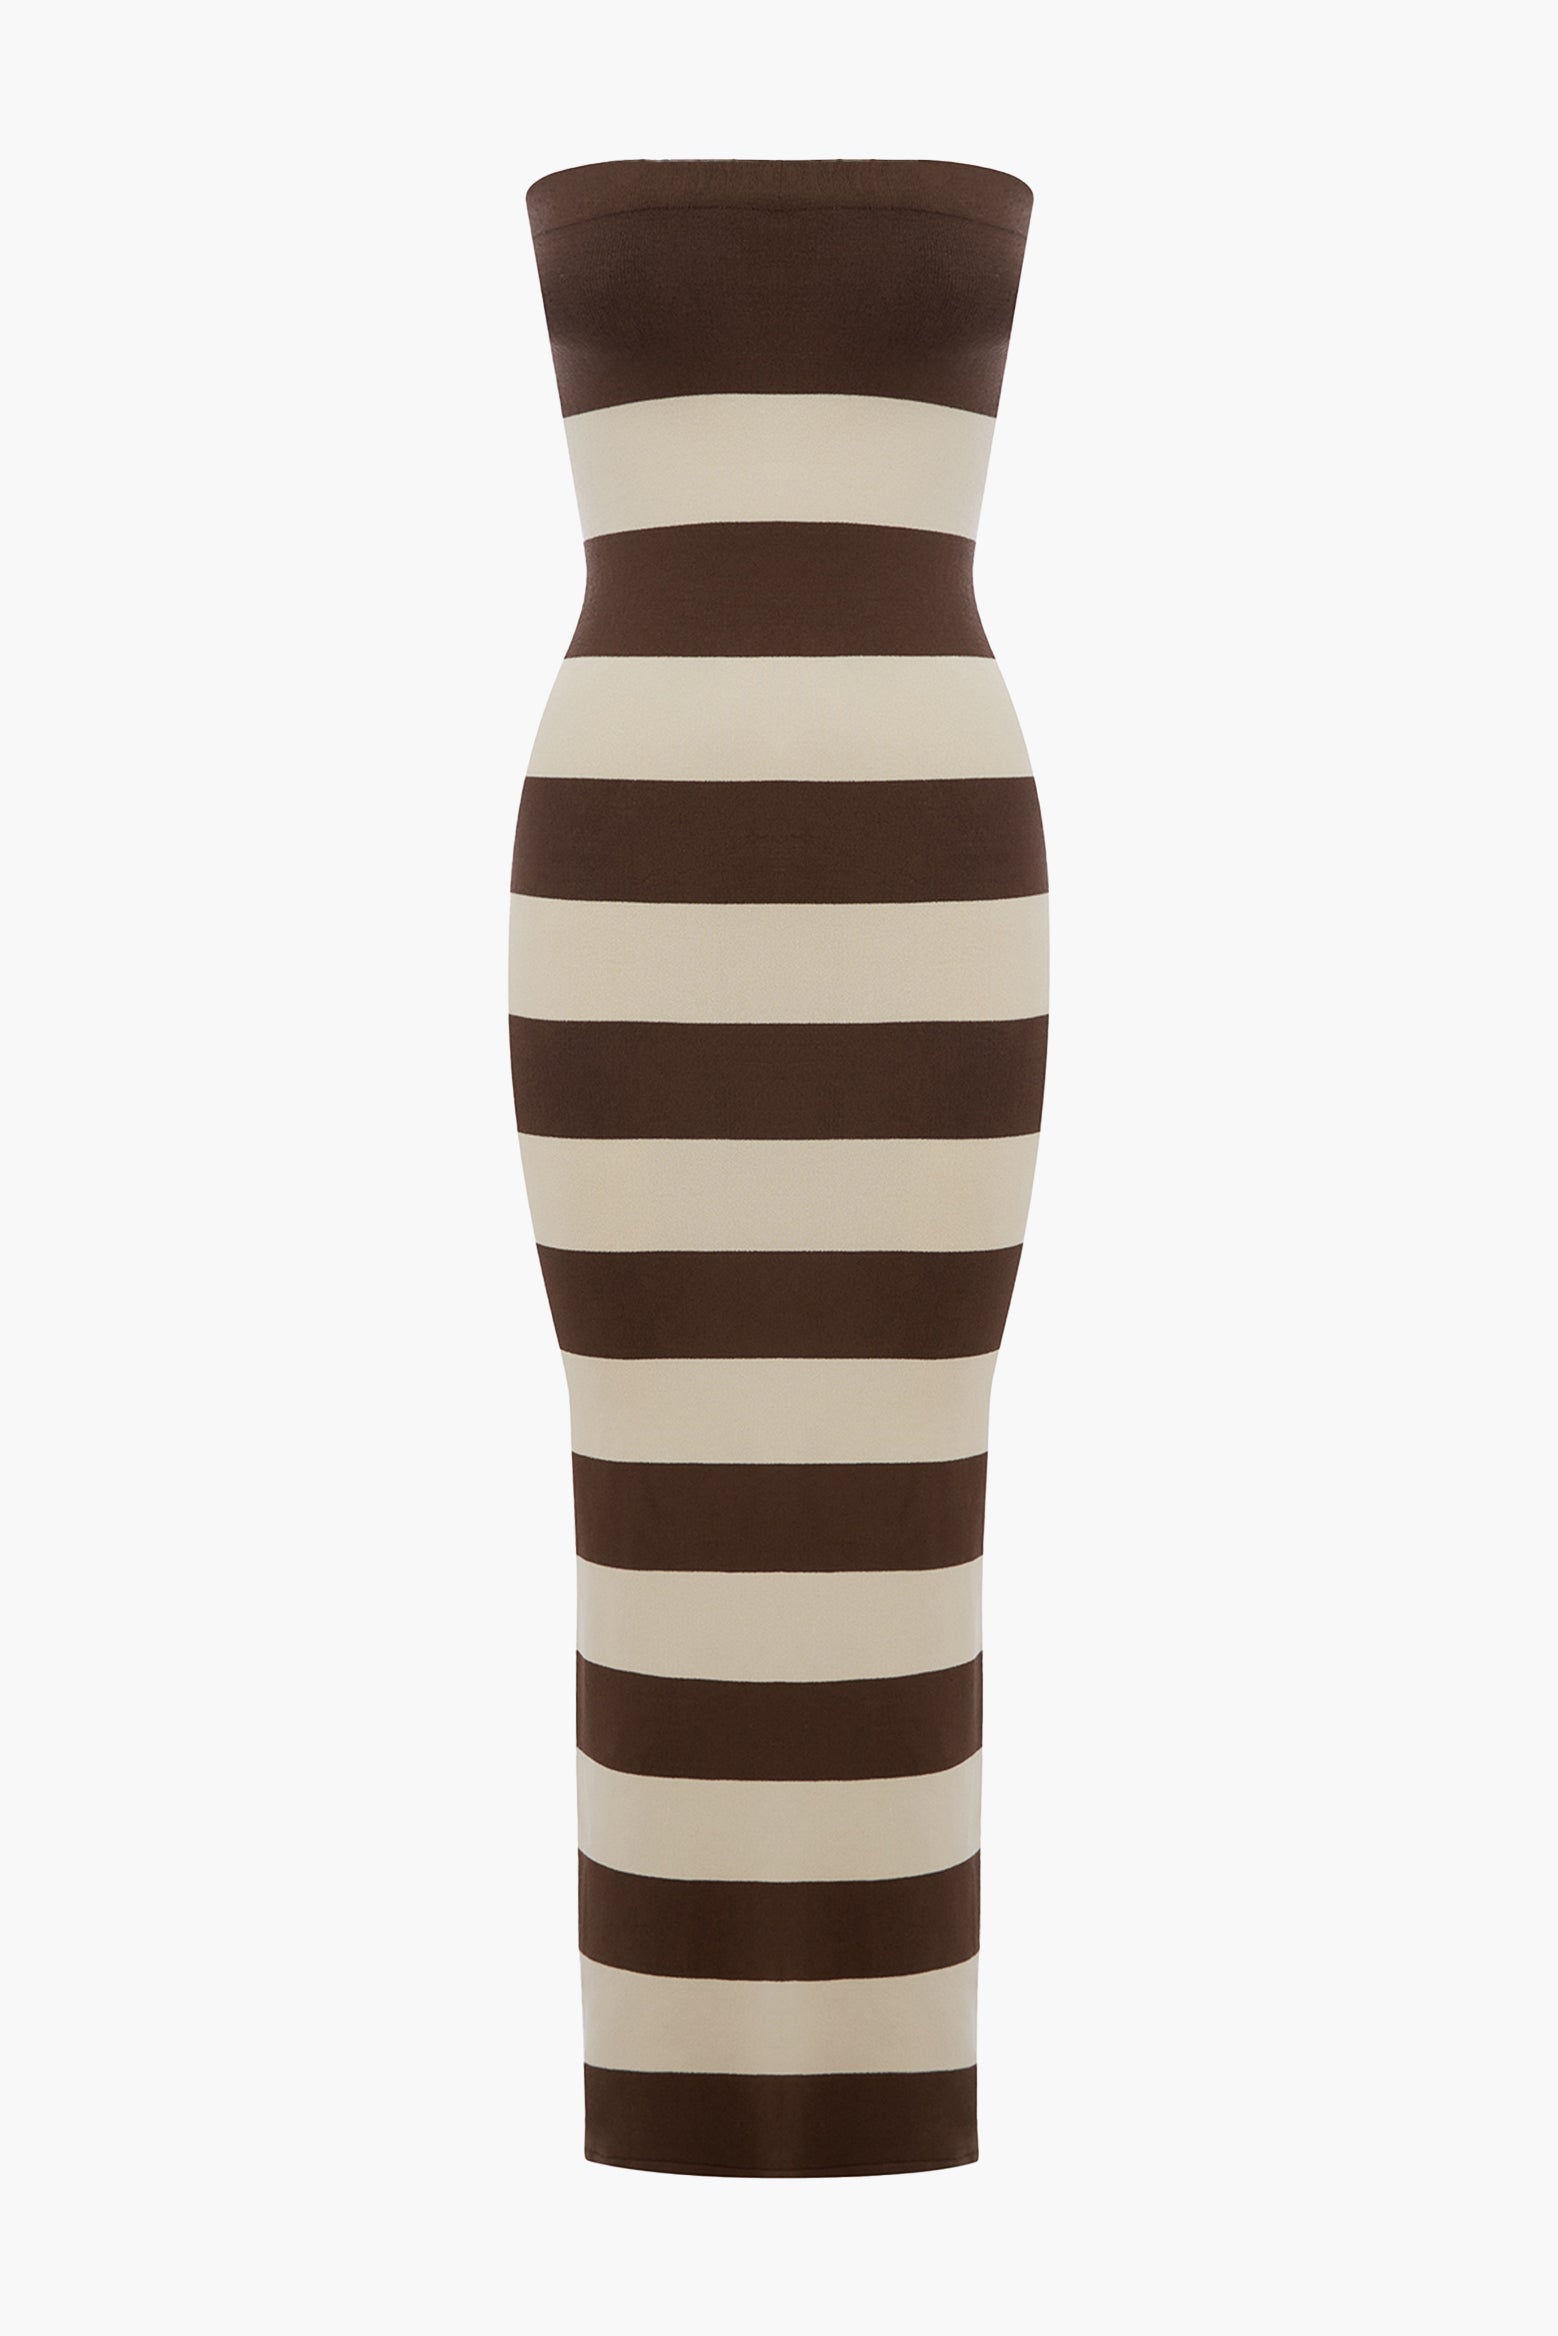 POSSE Theo Maxi Dress in Chocolate/Cream available at The New Trend Australia. 